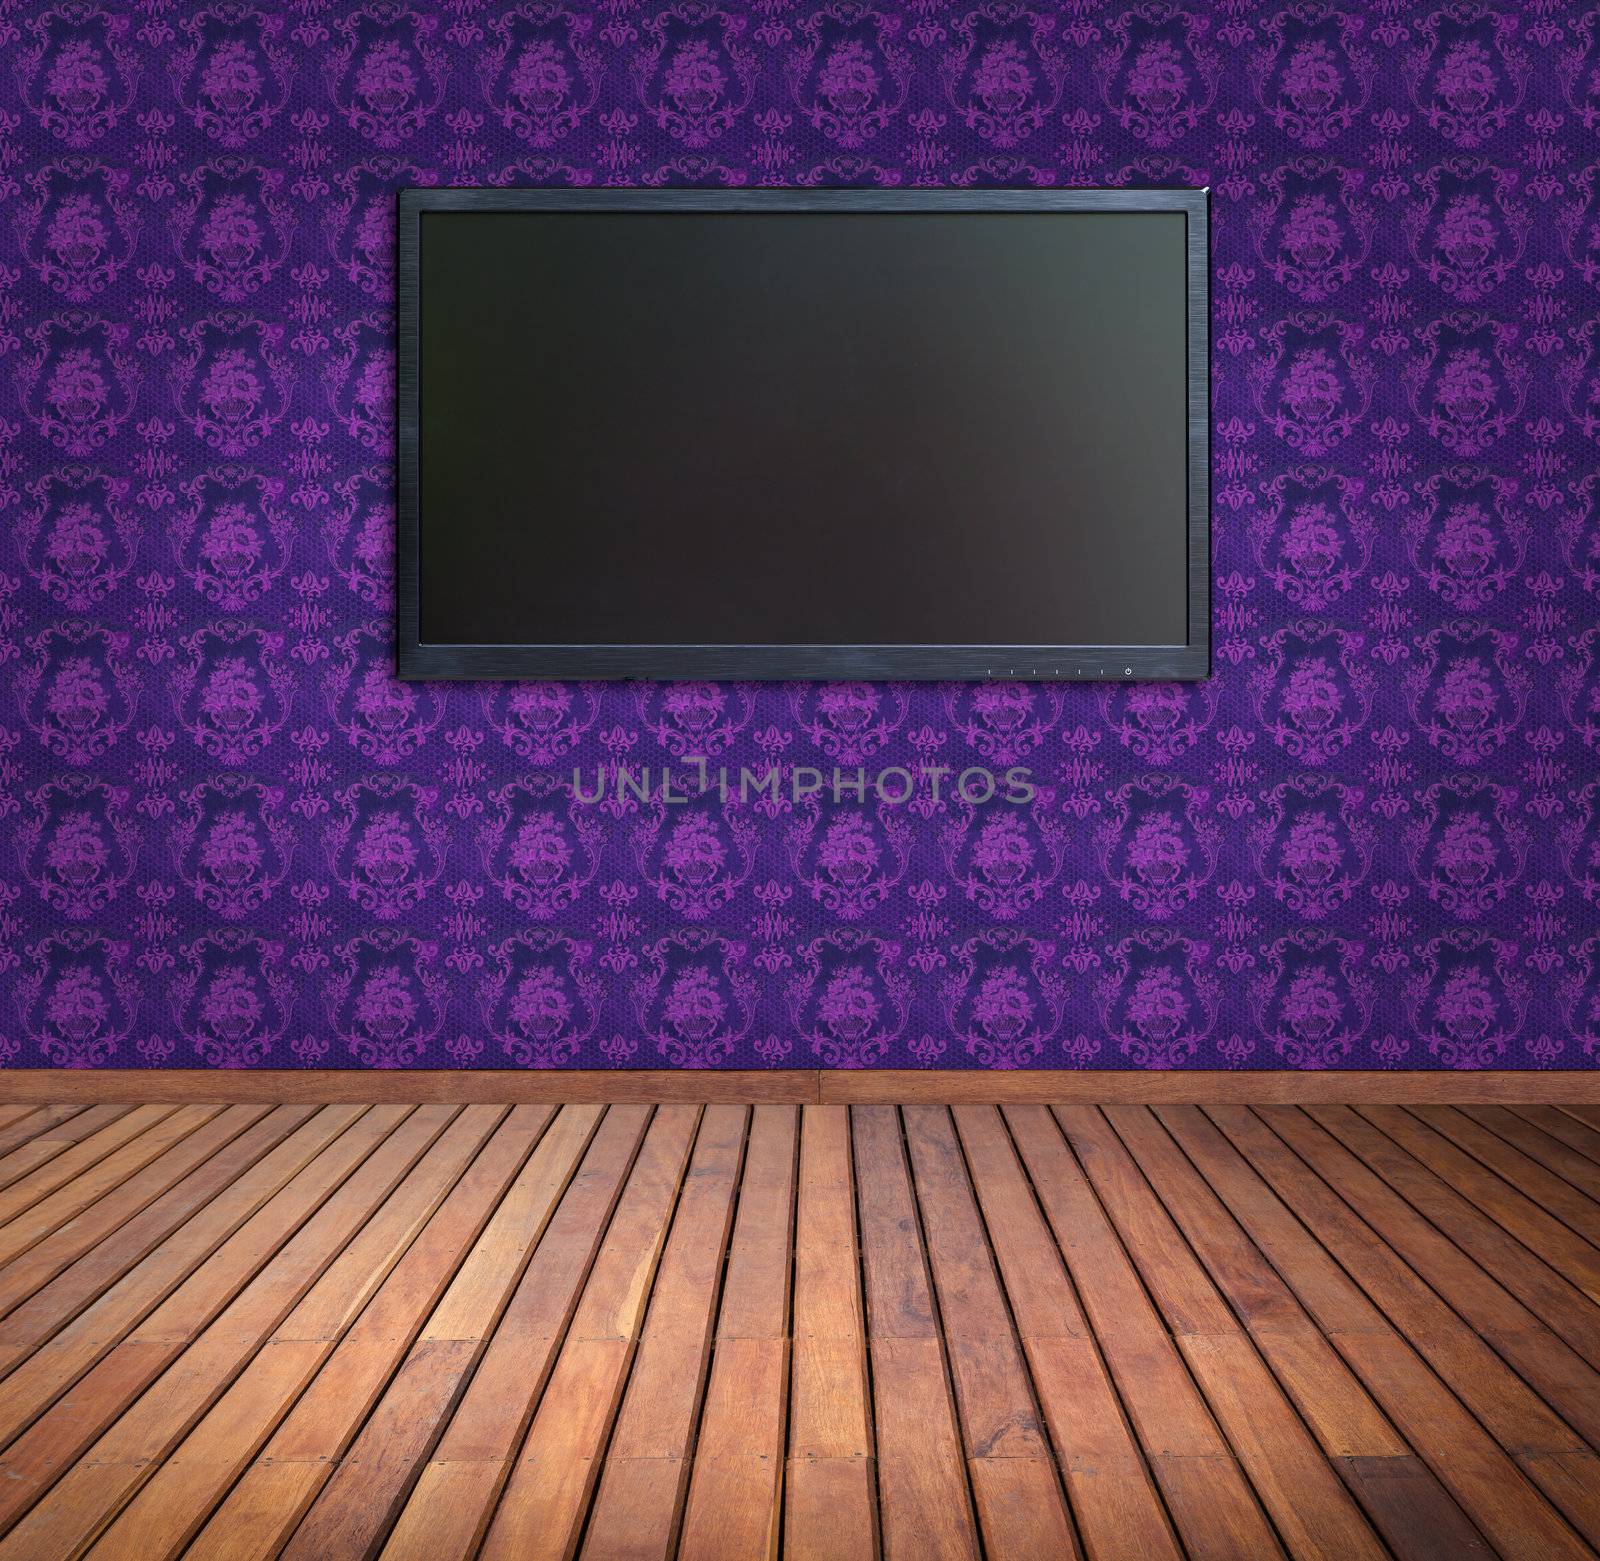 wide screen television in  purple wallpaper room by tungphoto